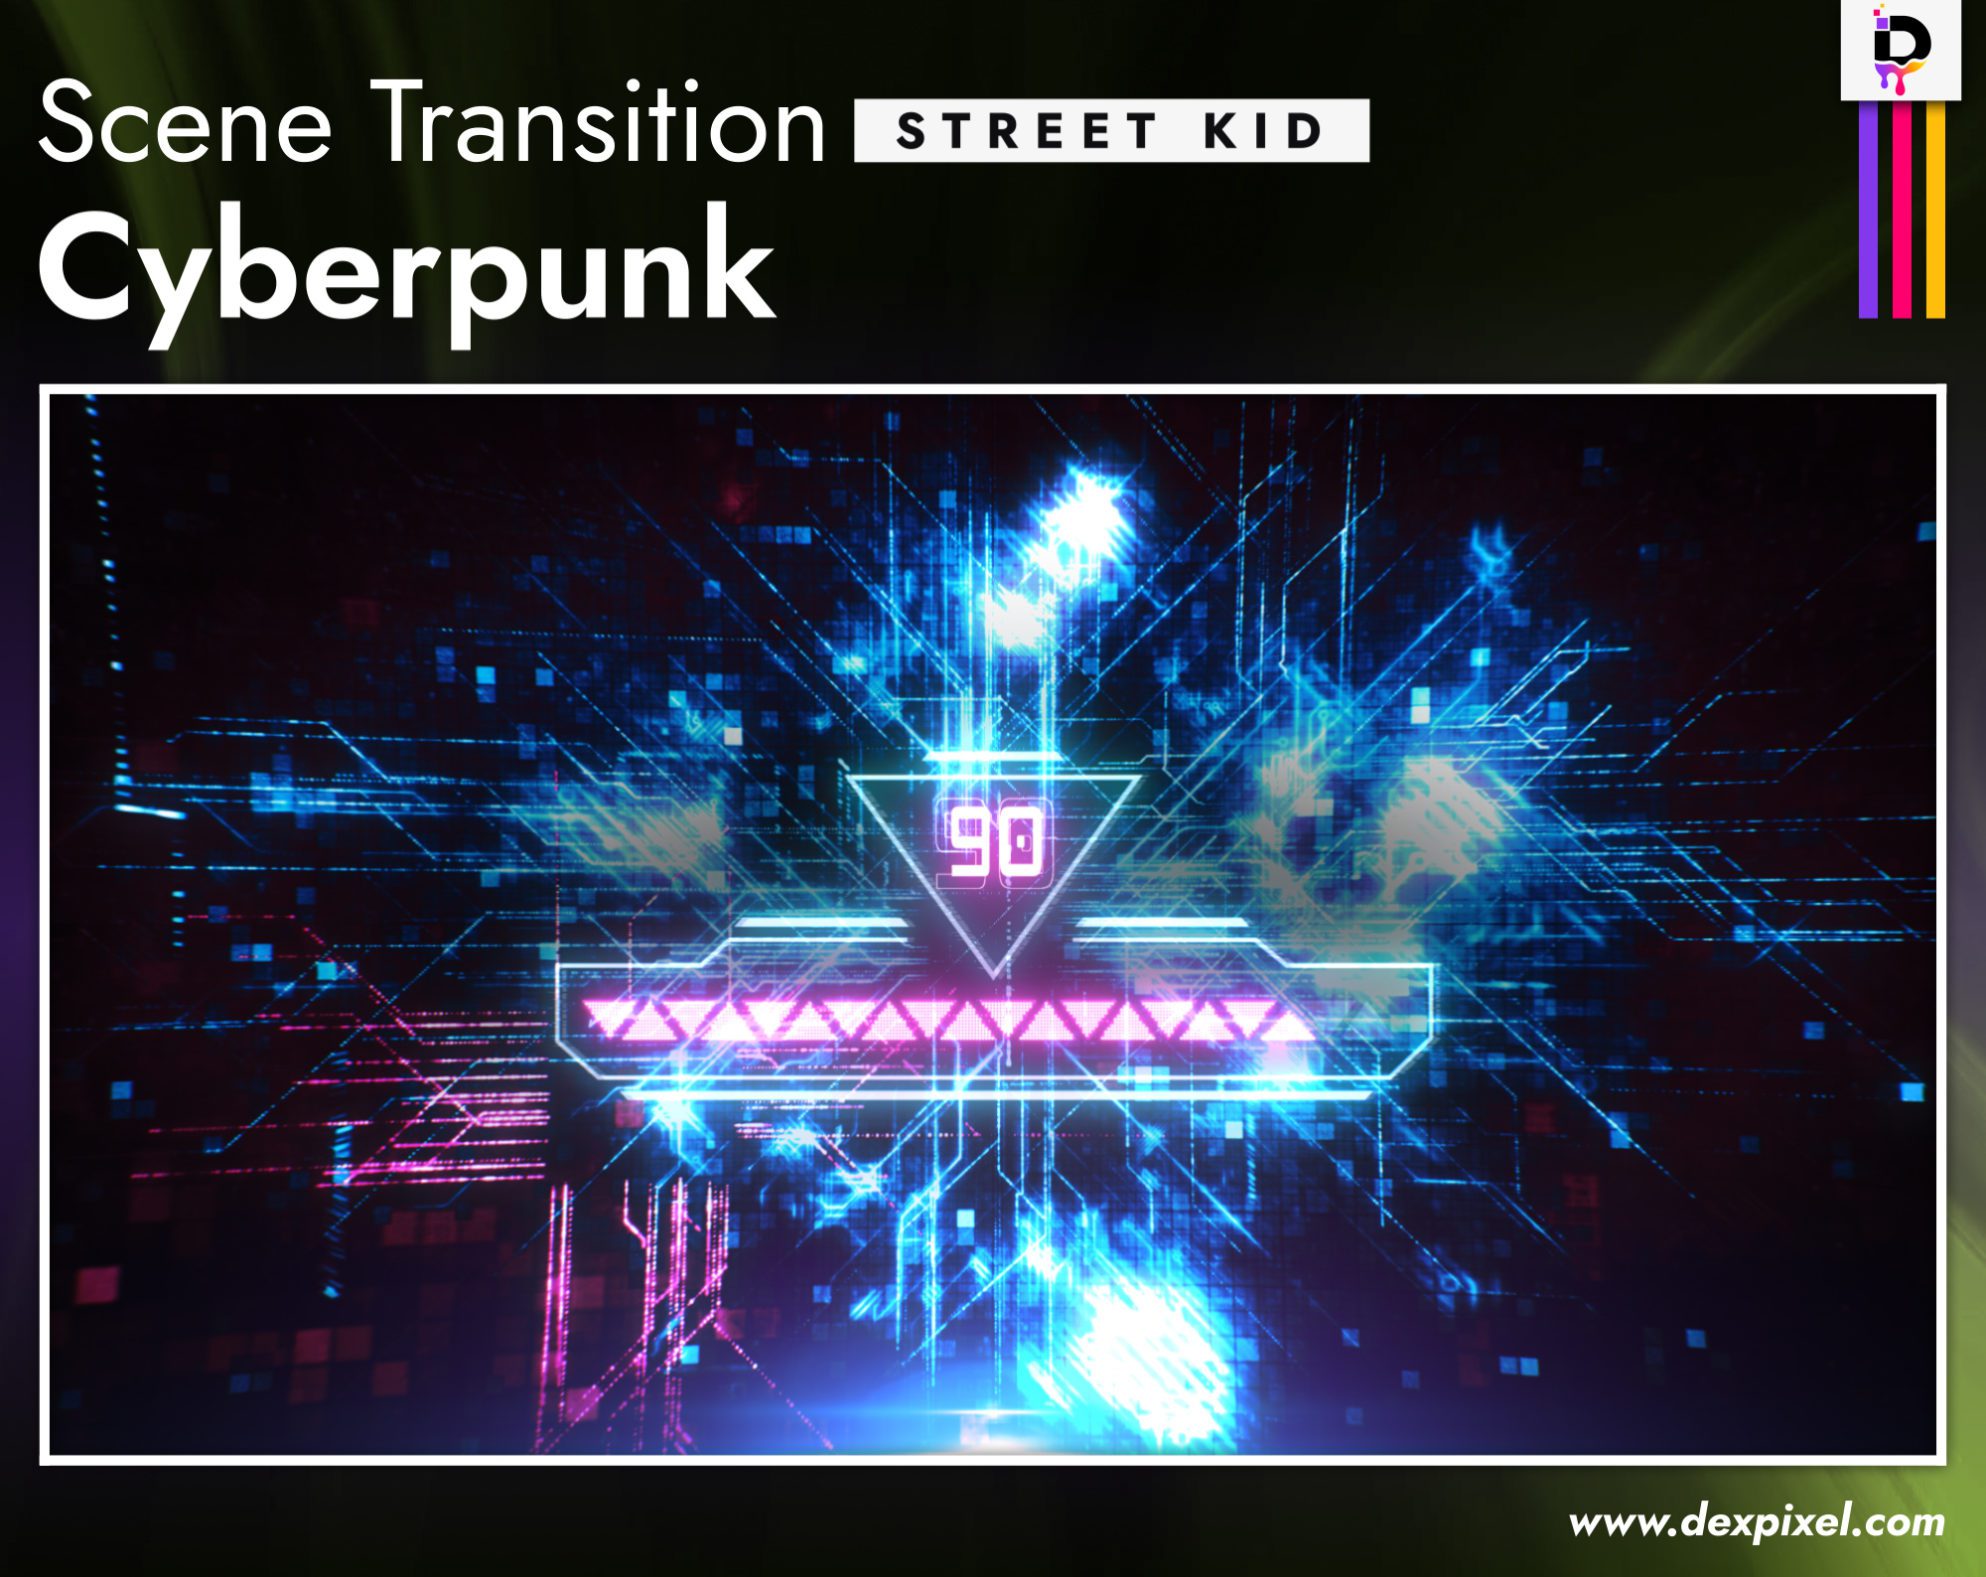 Cyberpunk Stinger is a new way to experience your favorite games. It's a sleek and stylish transition that will make you feel like you're in the game. We offer many different transitions to choose from, each with its own unique style. Choose your favorite color and get ready to emerge in the world of glitches, neon colors, and glitch gaming vibes.